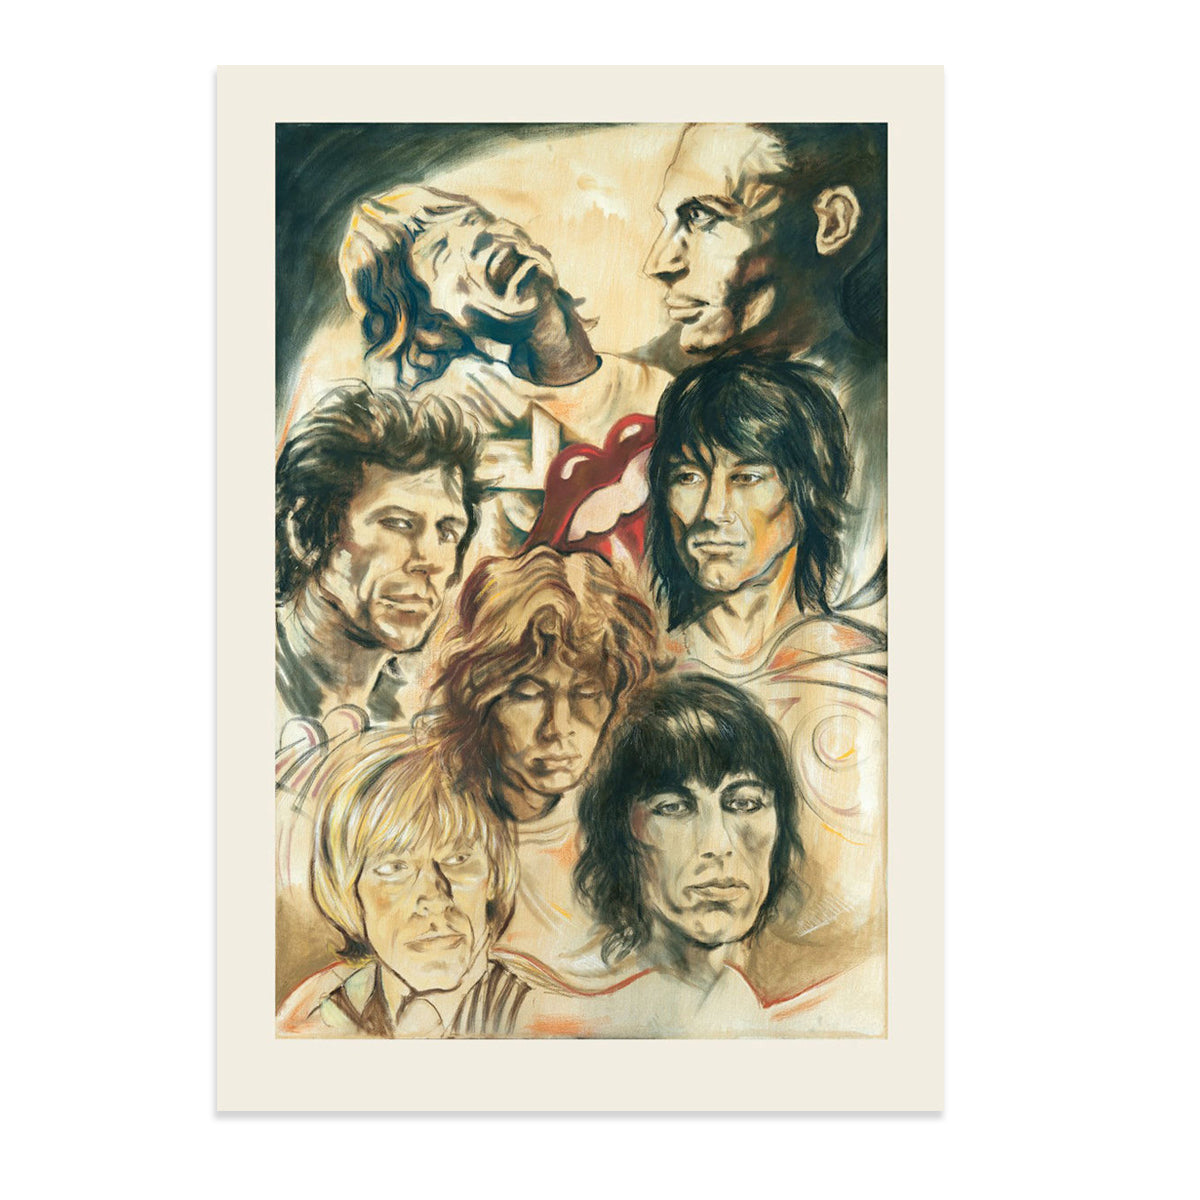 Ronnie Wood - Stones Through The Ages II (Medium Size)